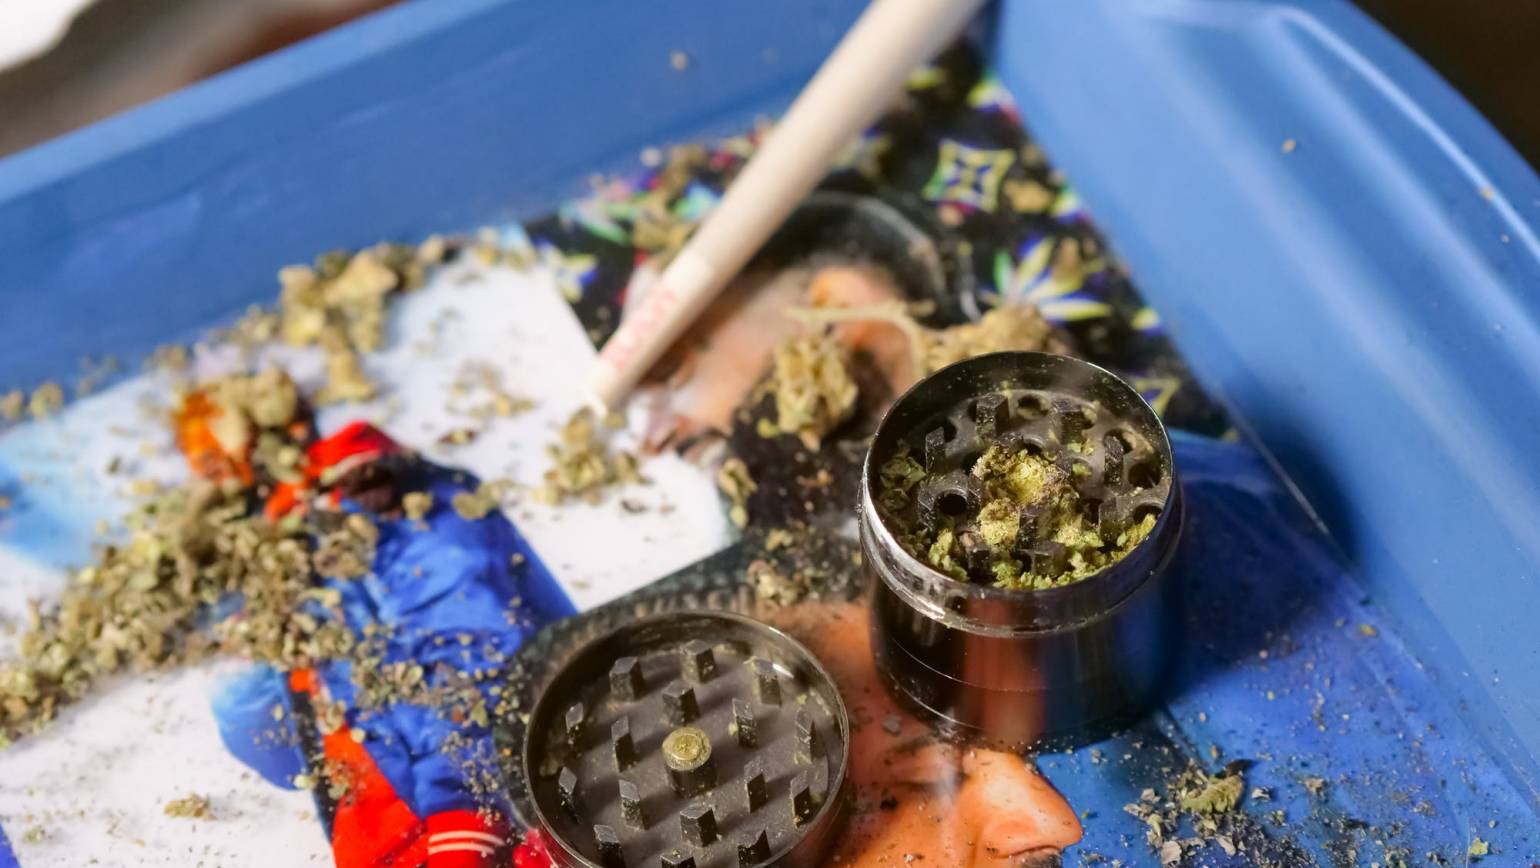 What Is A Weed Grinder?